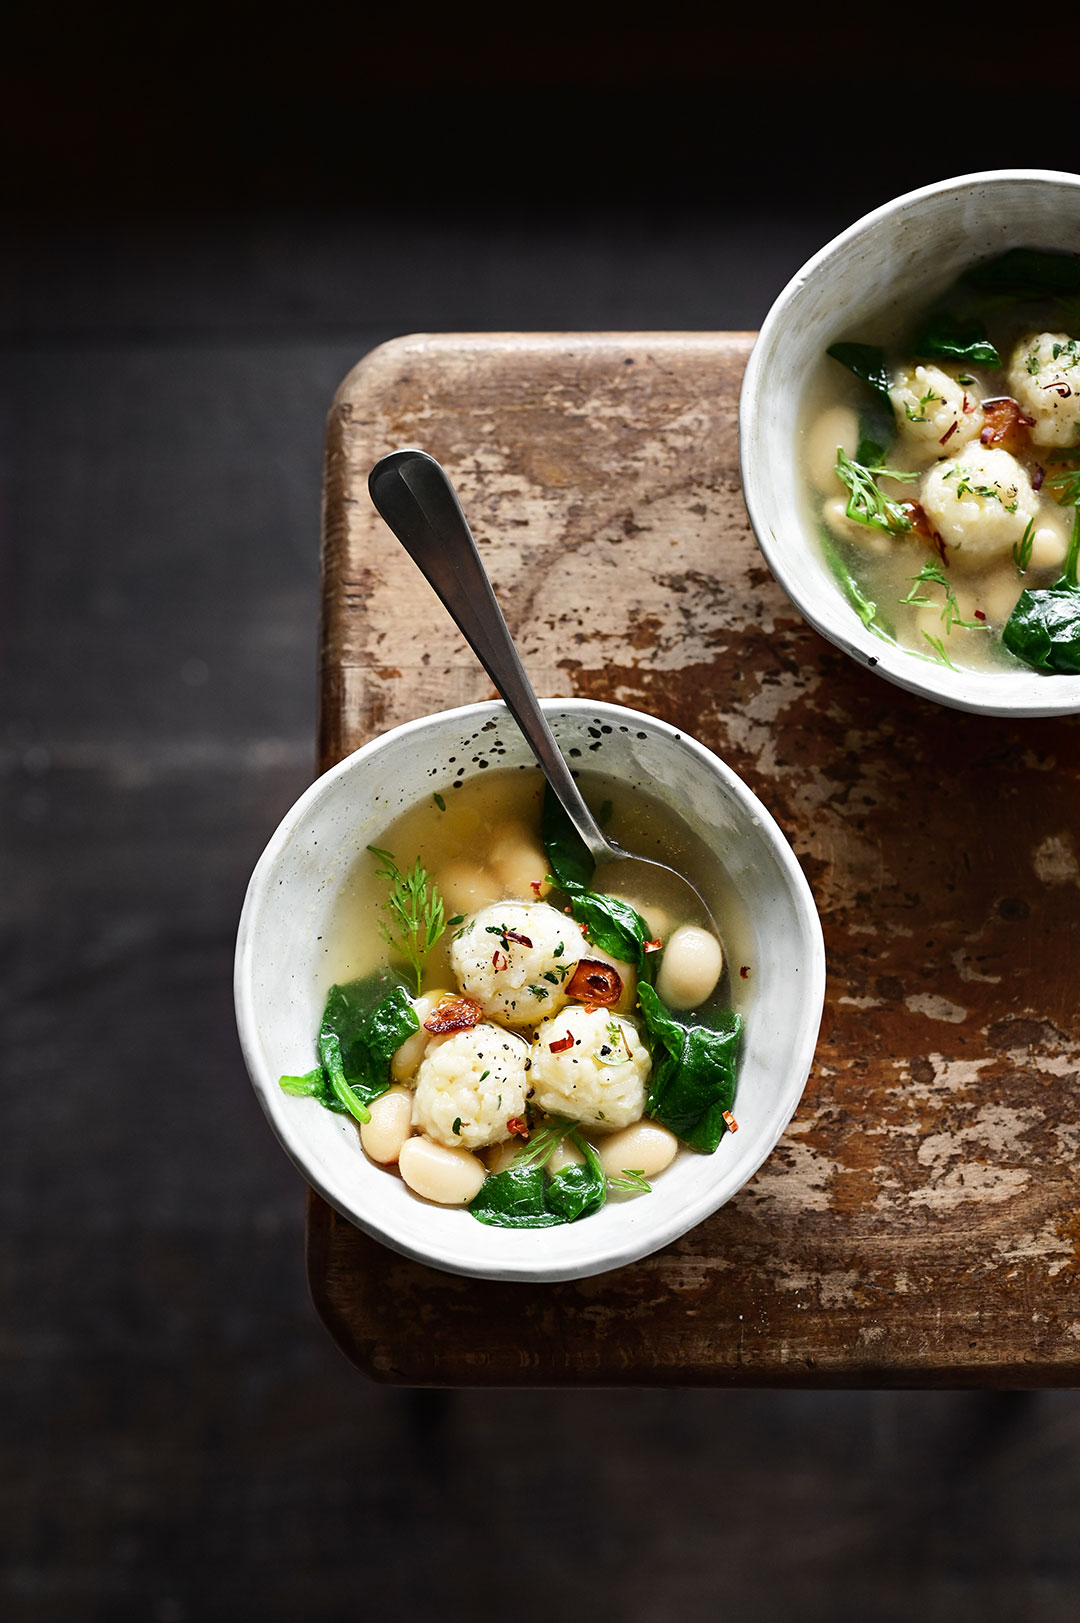 serving dumplings | Parmesan rice ball soup with spinach and butter beans